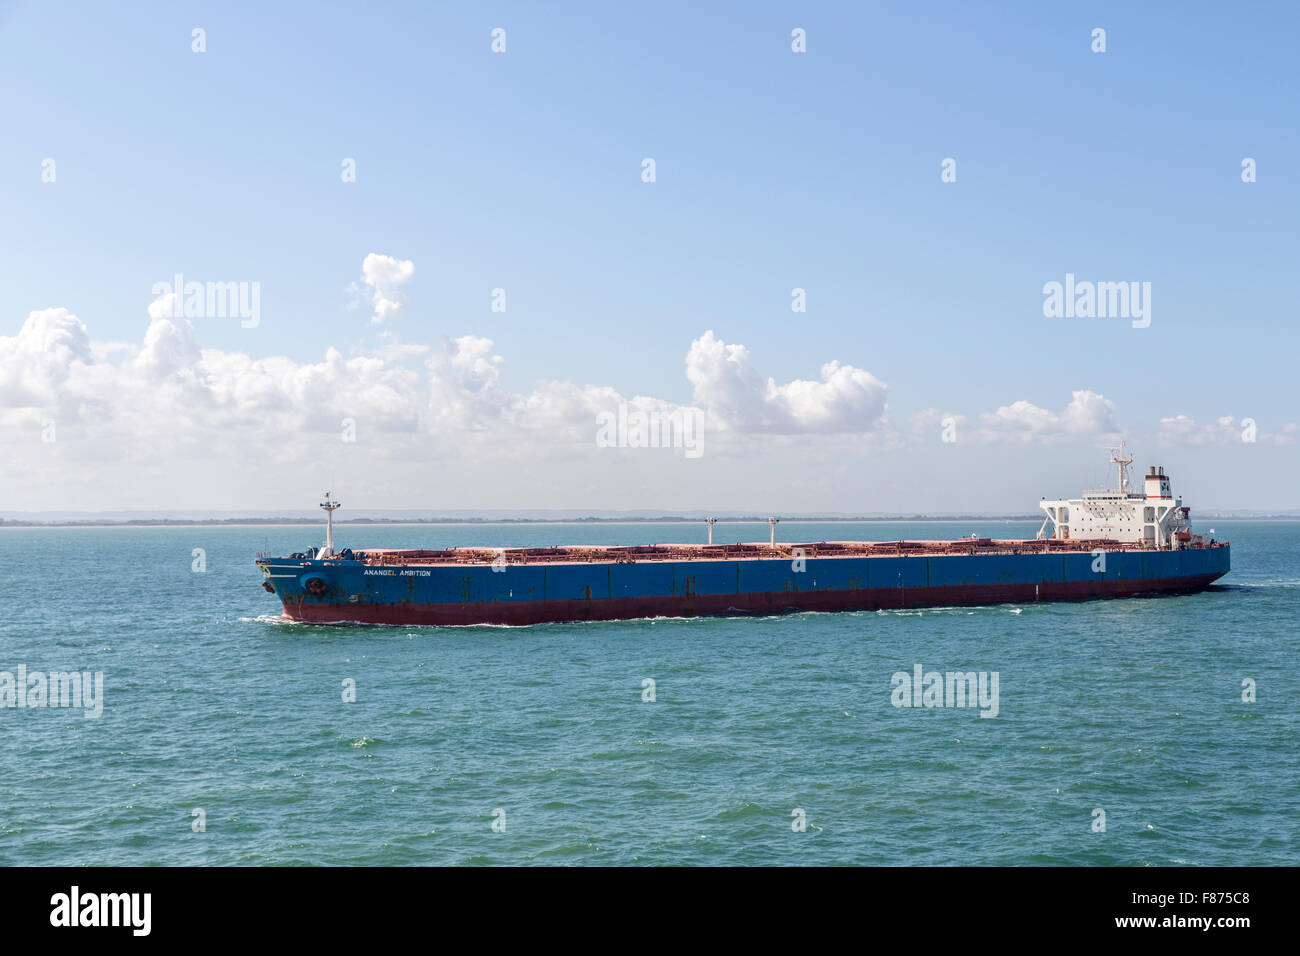 Anangel Ambition bulk carrier ship in the English Channel off Dunkirk Stock Photo